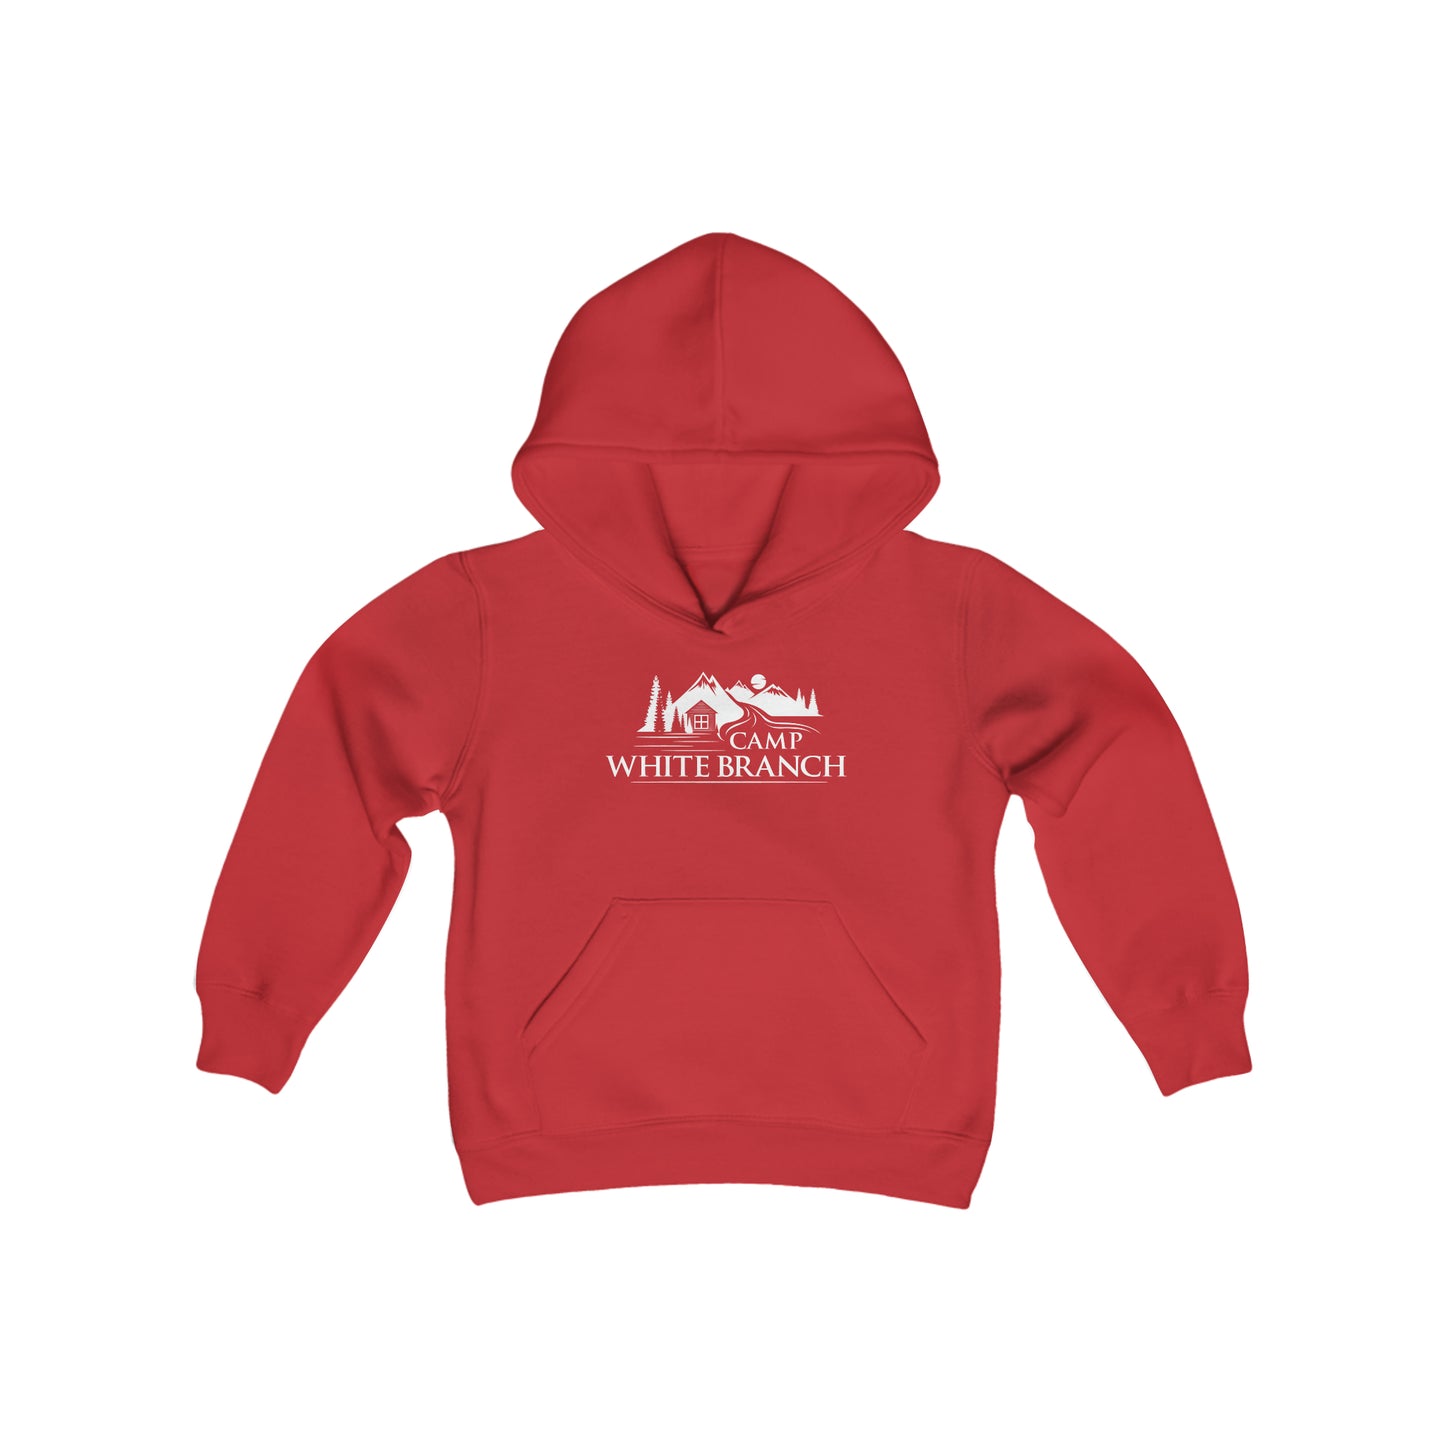 Camp White Branch Youth Hooded Sweatshirt